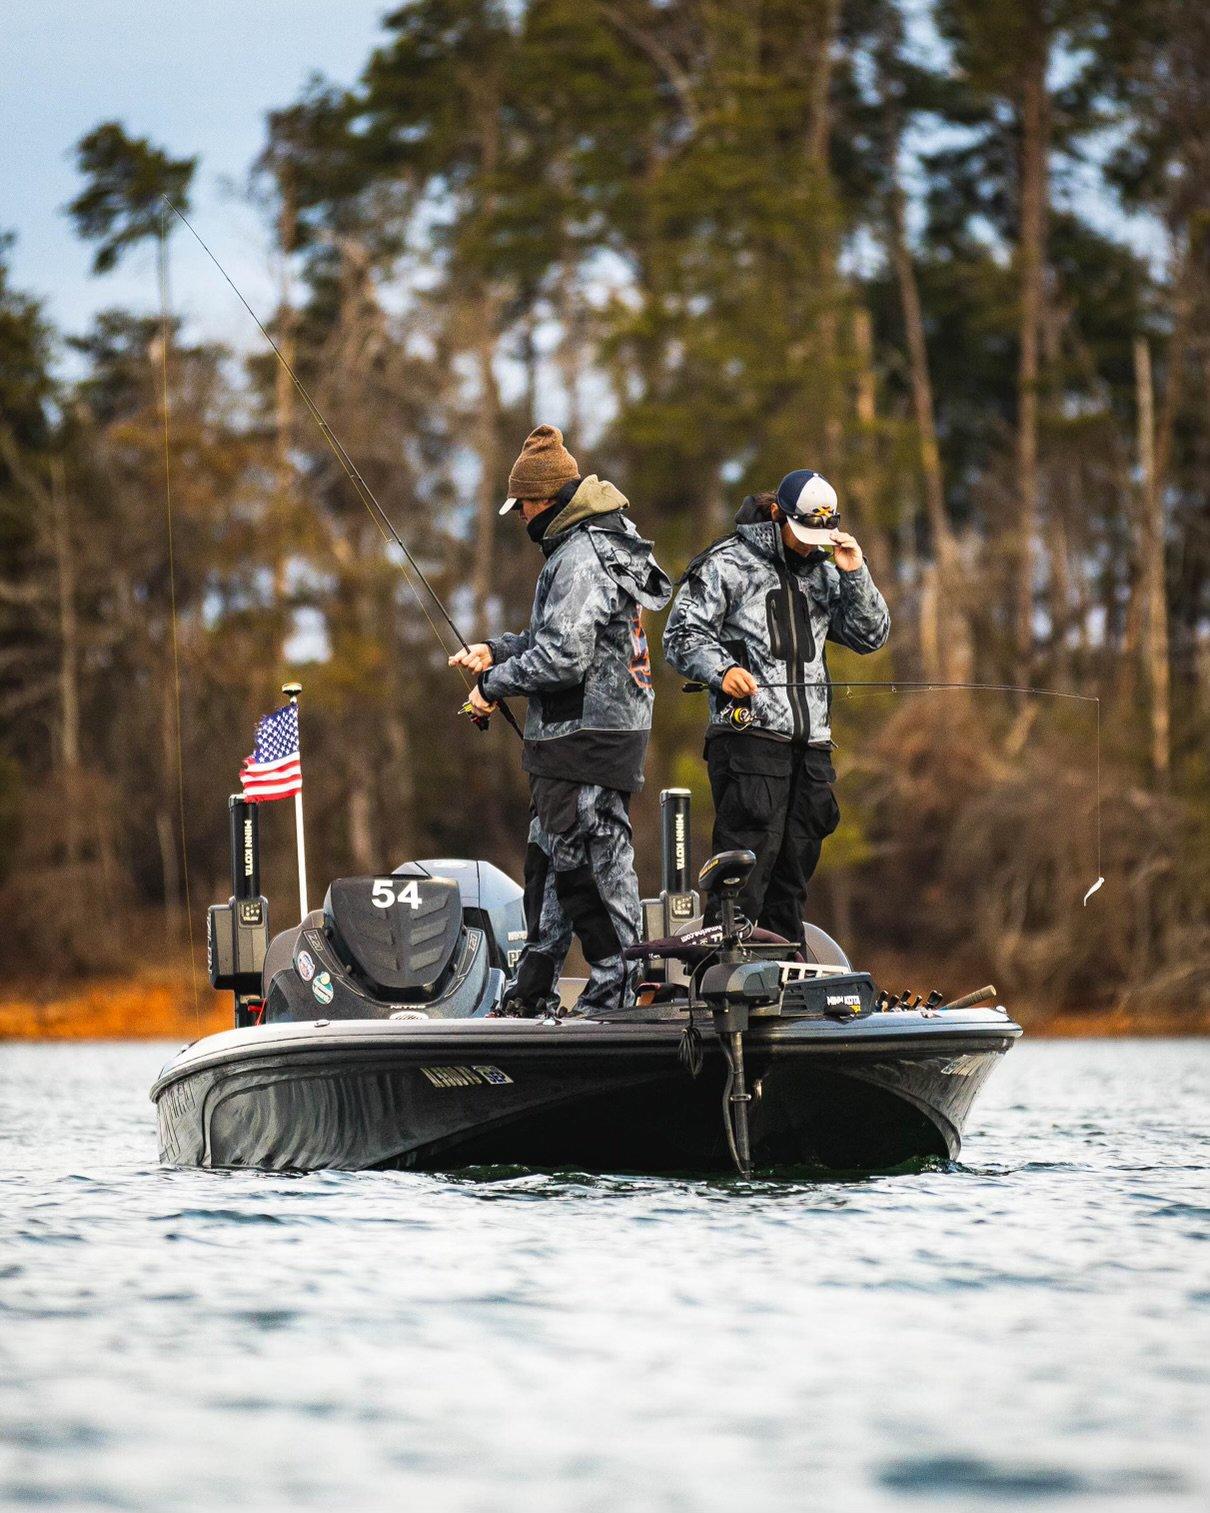 Logan Parks (left) and Tucker Smith (right) compete in the U.S. Open National Bass Fishing Championship. Image by Brandon Fien